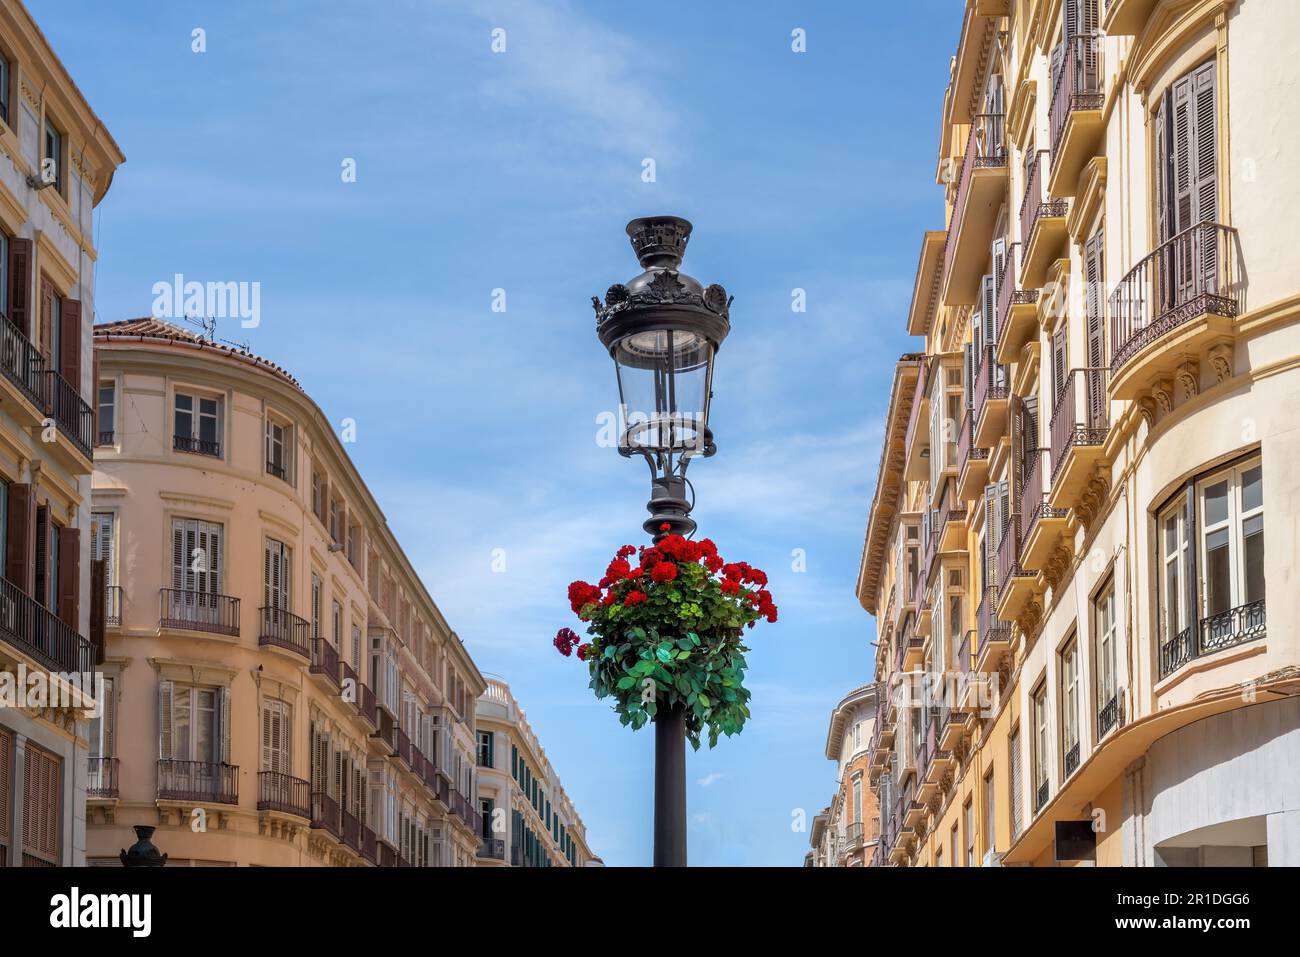 Lamppost with flowers at Calle Larios - famous pedestrian and shopping street - Malaga, Andalusia, Spain Stock Photo